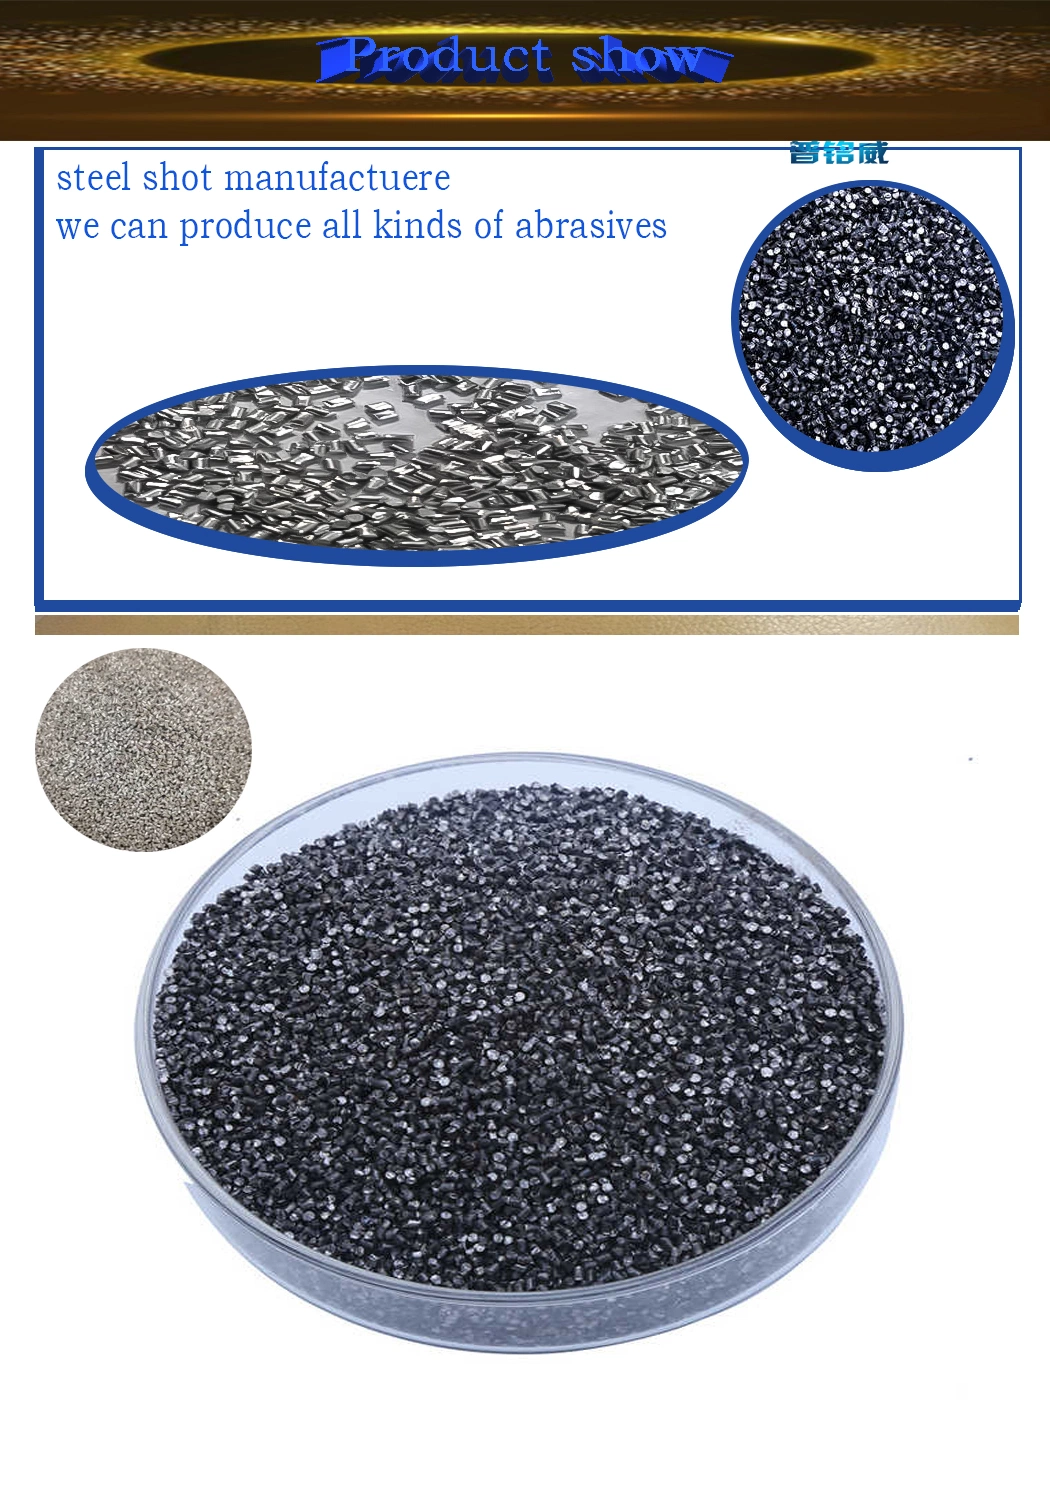 Wholesale Stainless Steel Cut Wire Shot Abrasive Used on Shot Blasting Industry